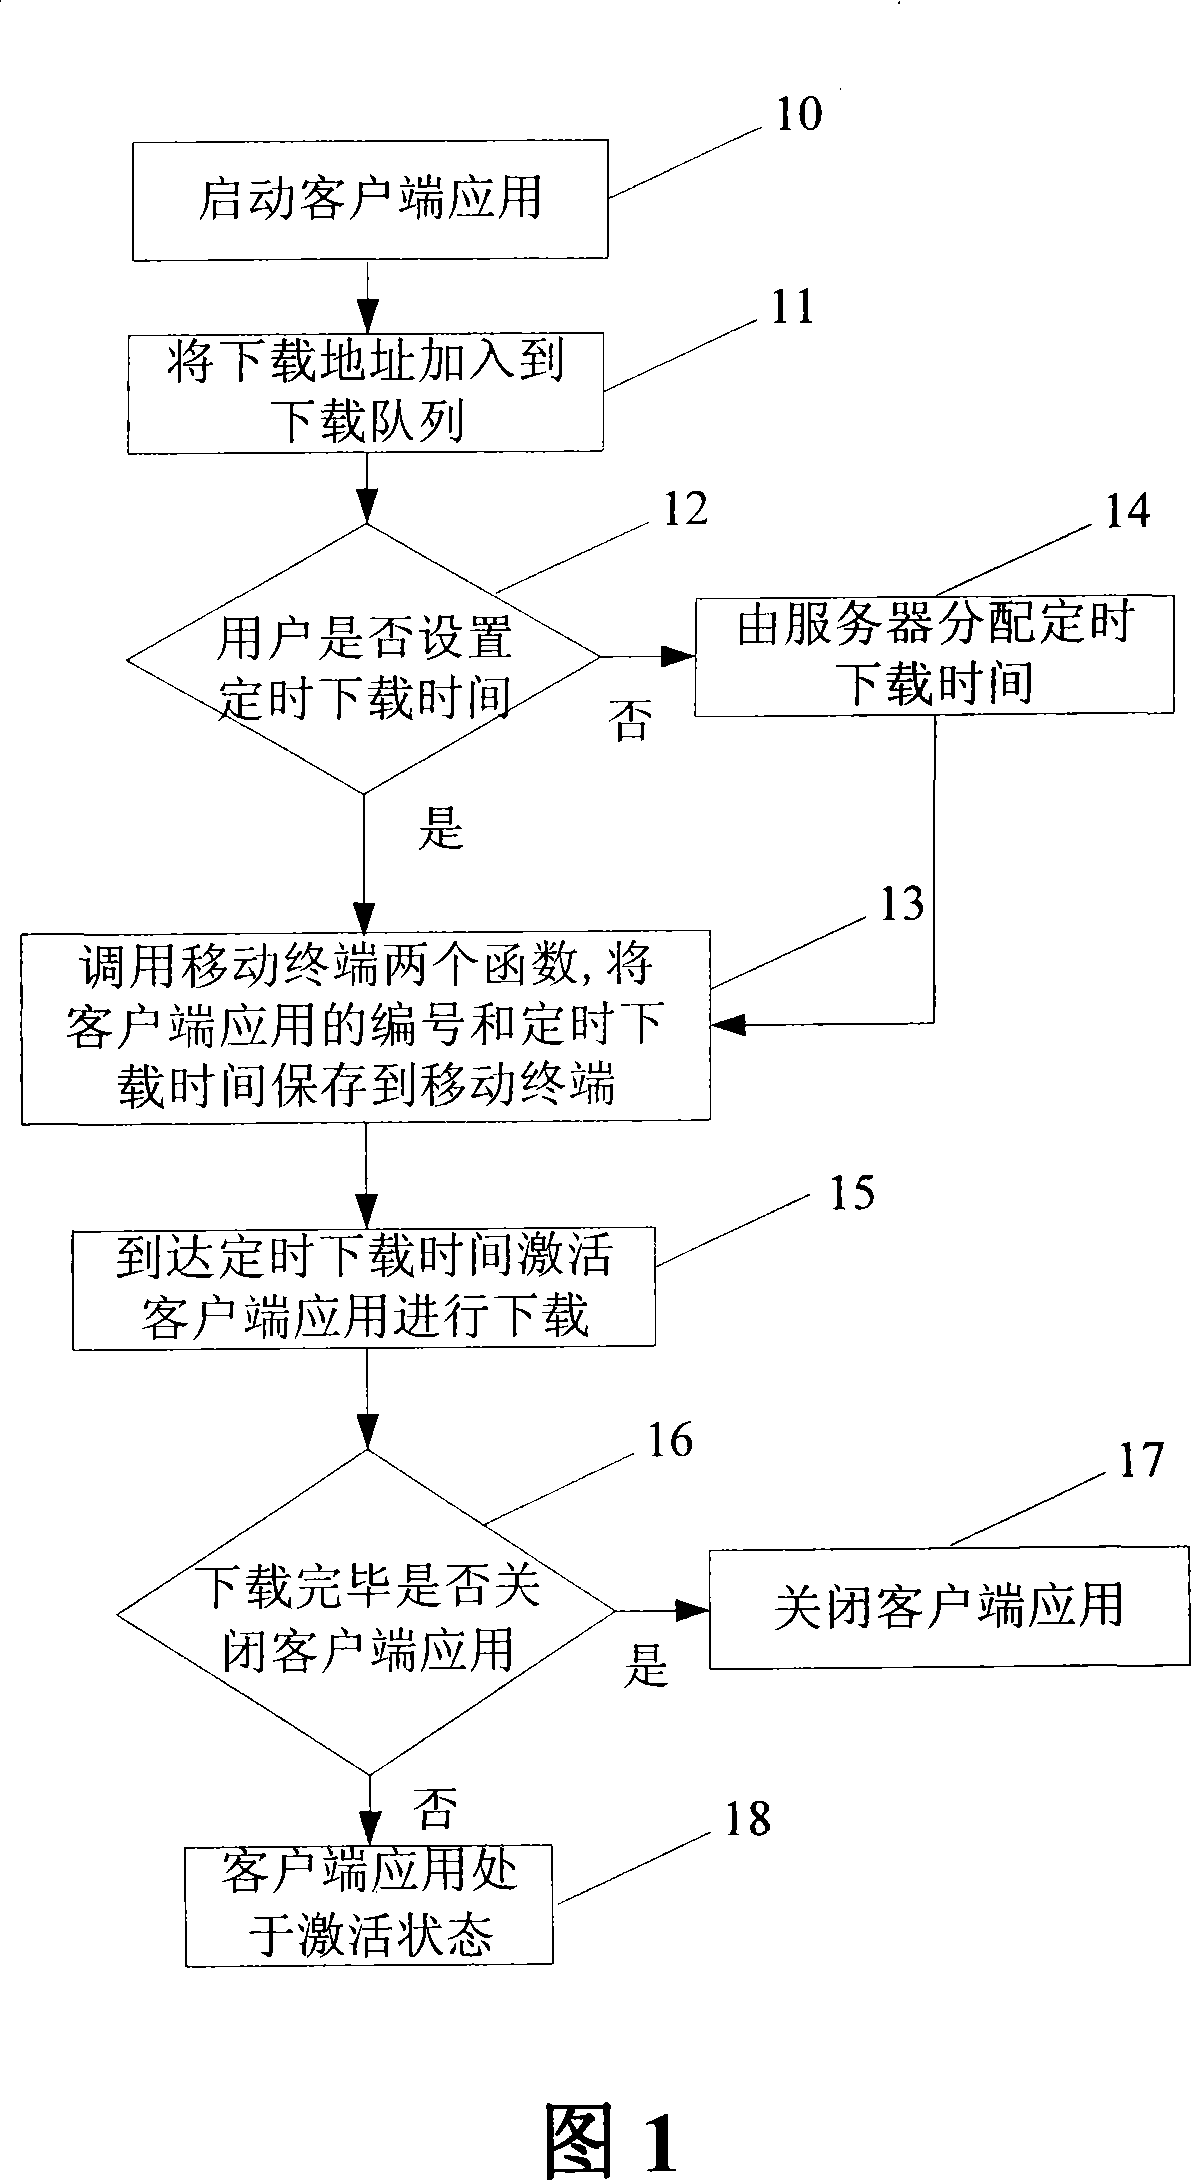 Method and system for timing downloading of mobile terminal